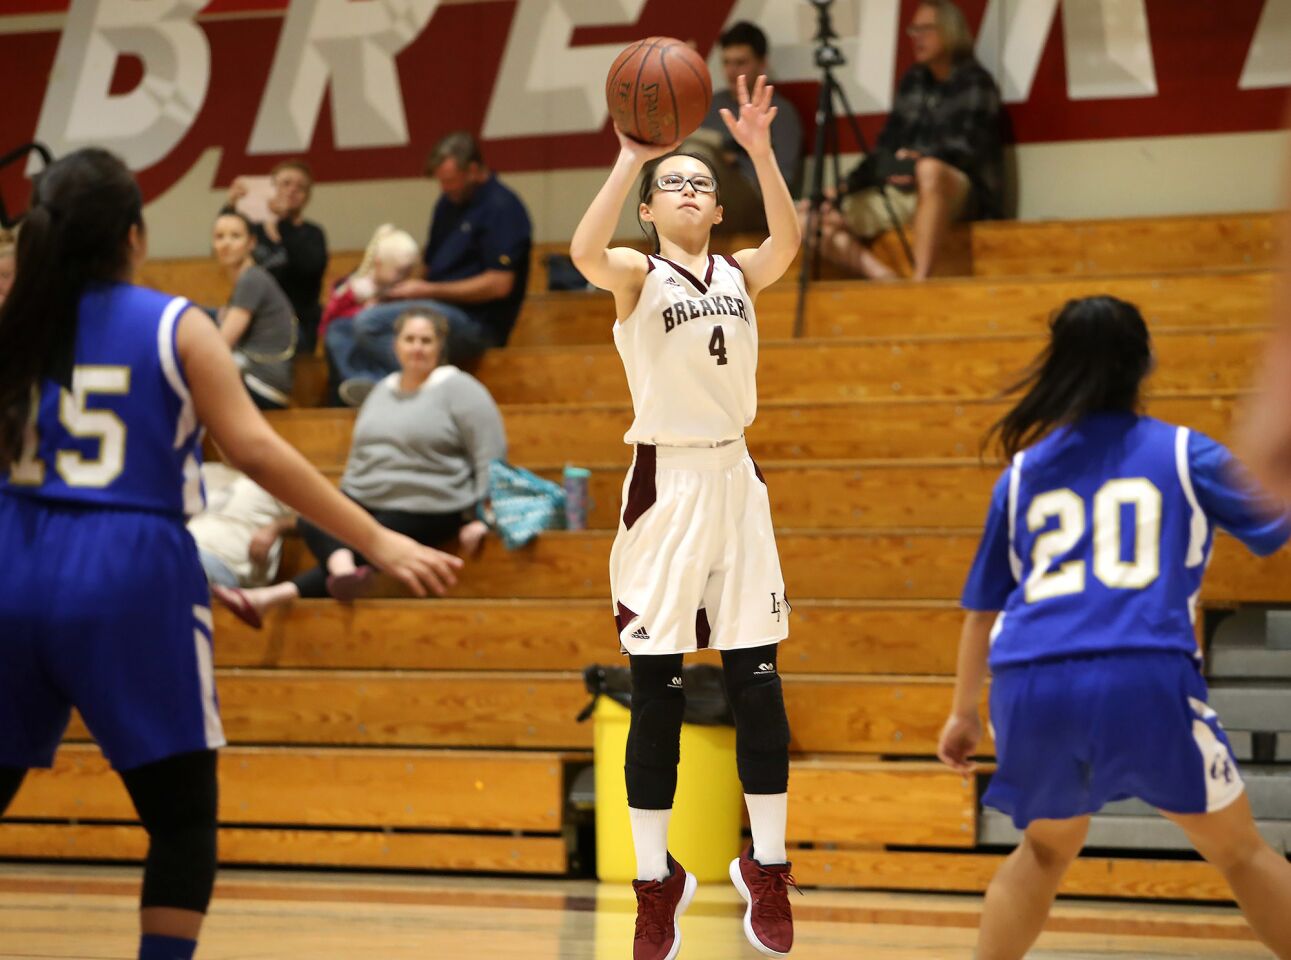 Laguna's Anna Cheng puts up another two points in girls basketball against La Verne Calvary Baptist on Thursday.